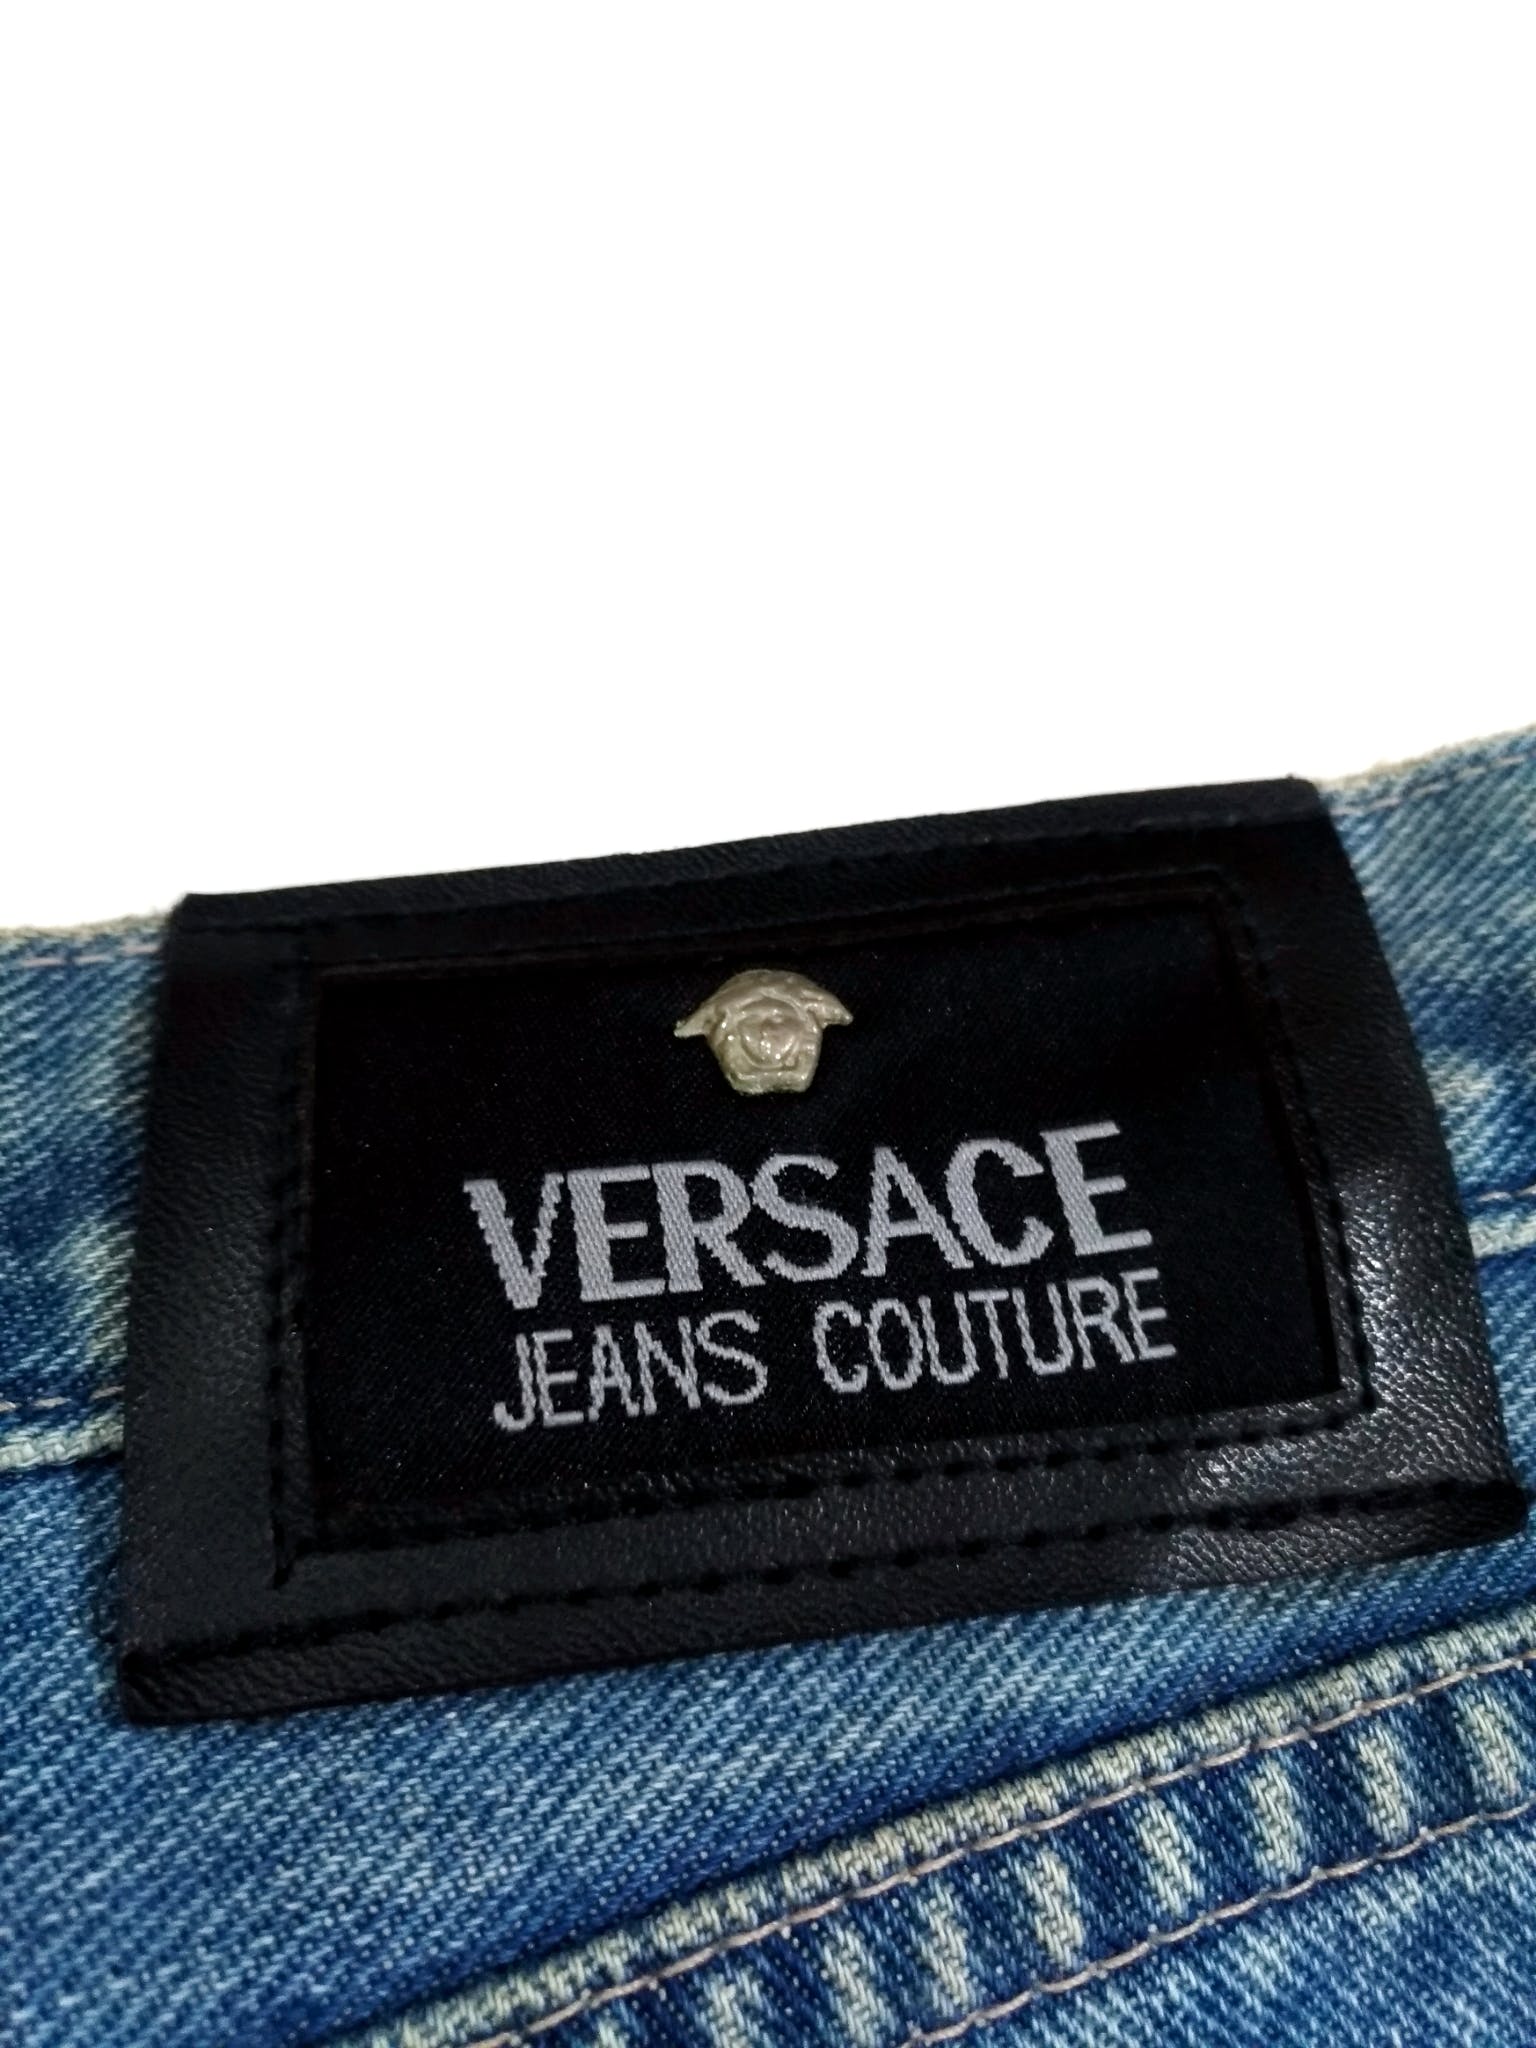 RARE!VTG 90s VERSACE JEANS COUTURE MADE IN ITALY BLUE DENIM - 5